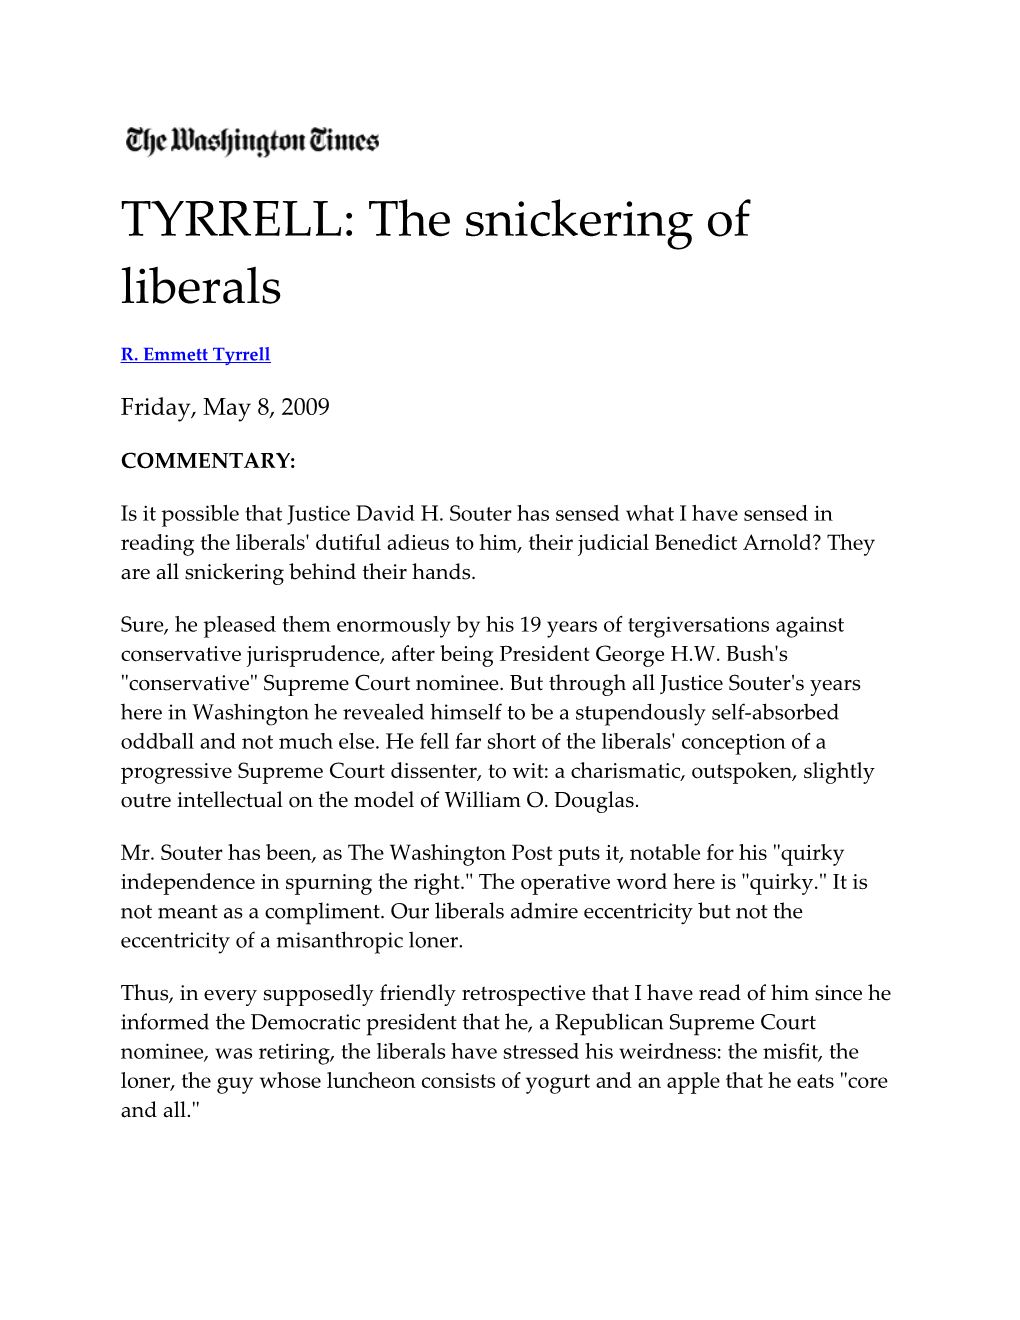 TYRRELL: the Snickering of Liberals